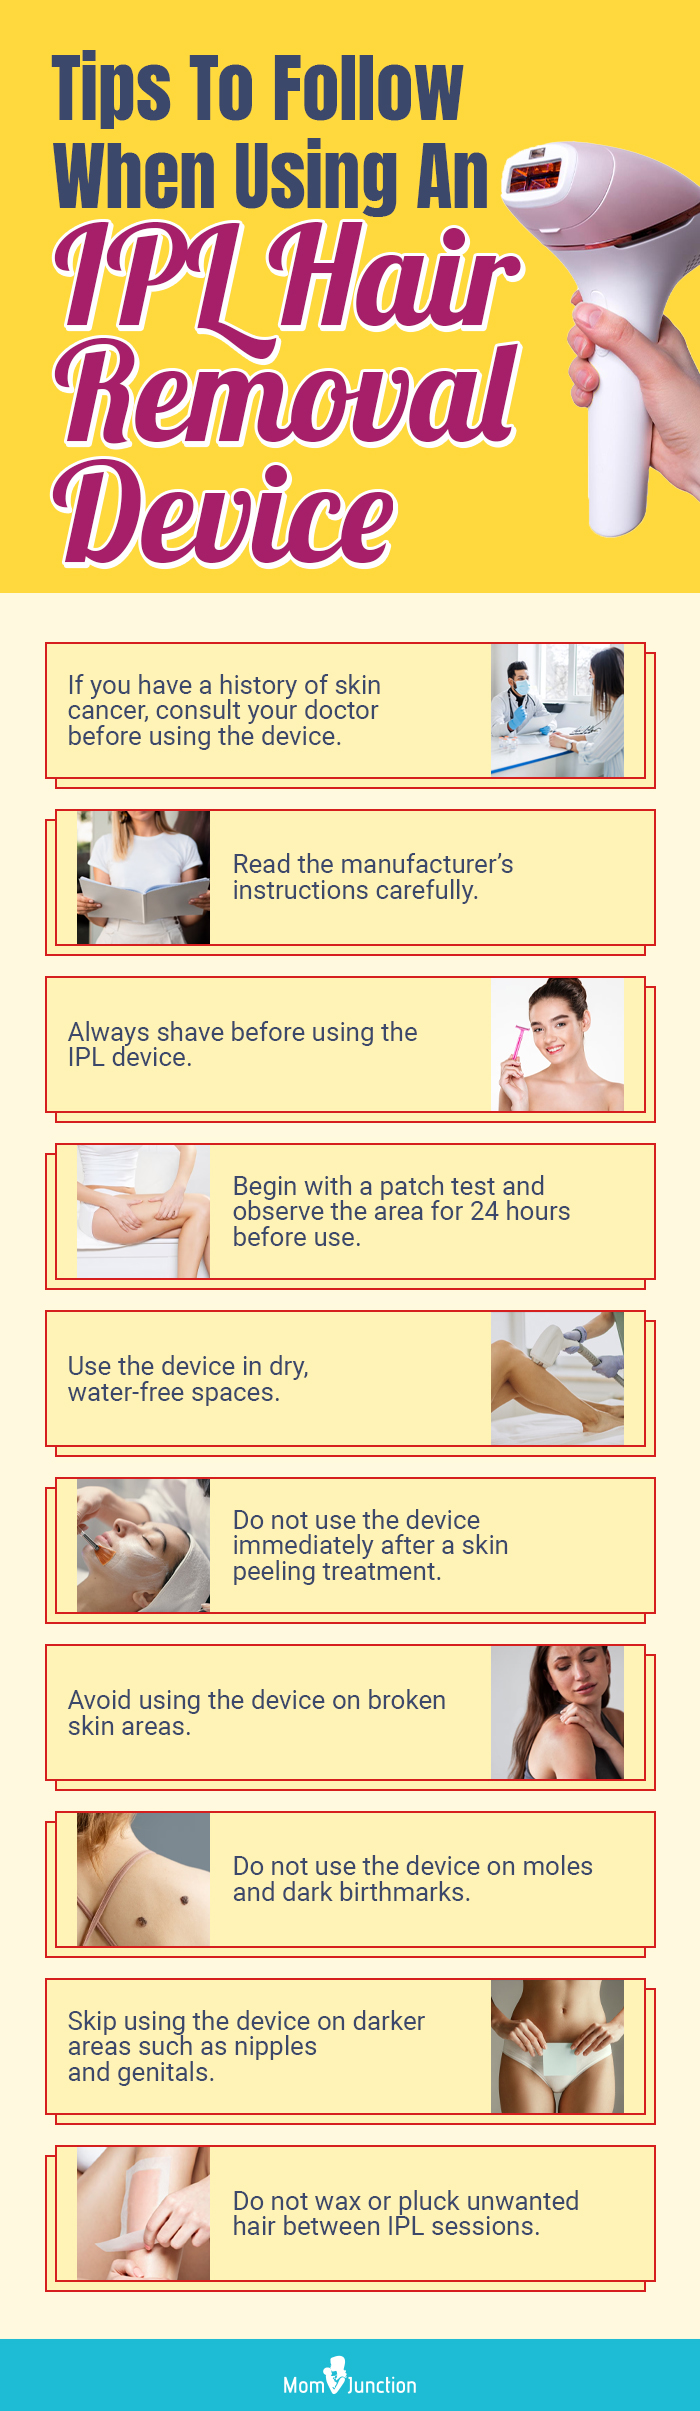 Tips To Follow When Using An IPL Hair Removal Device (infographic)